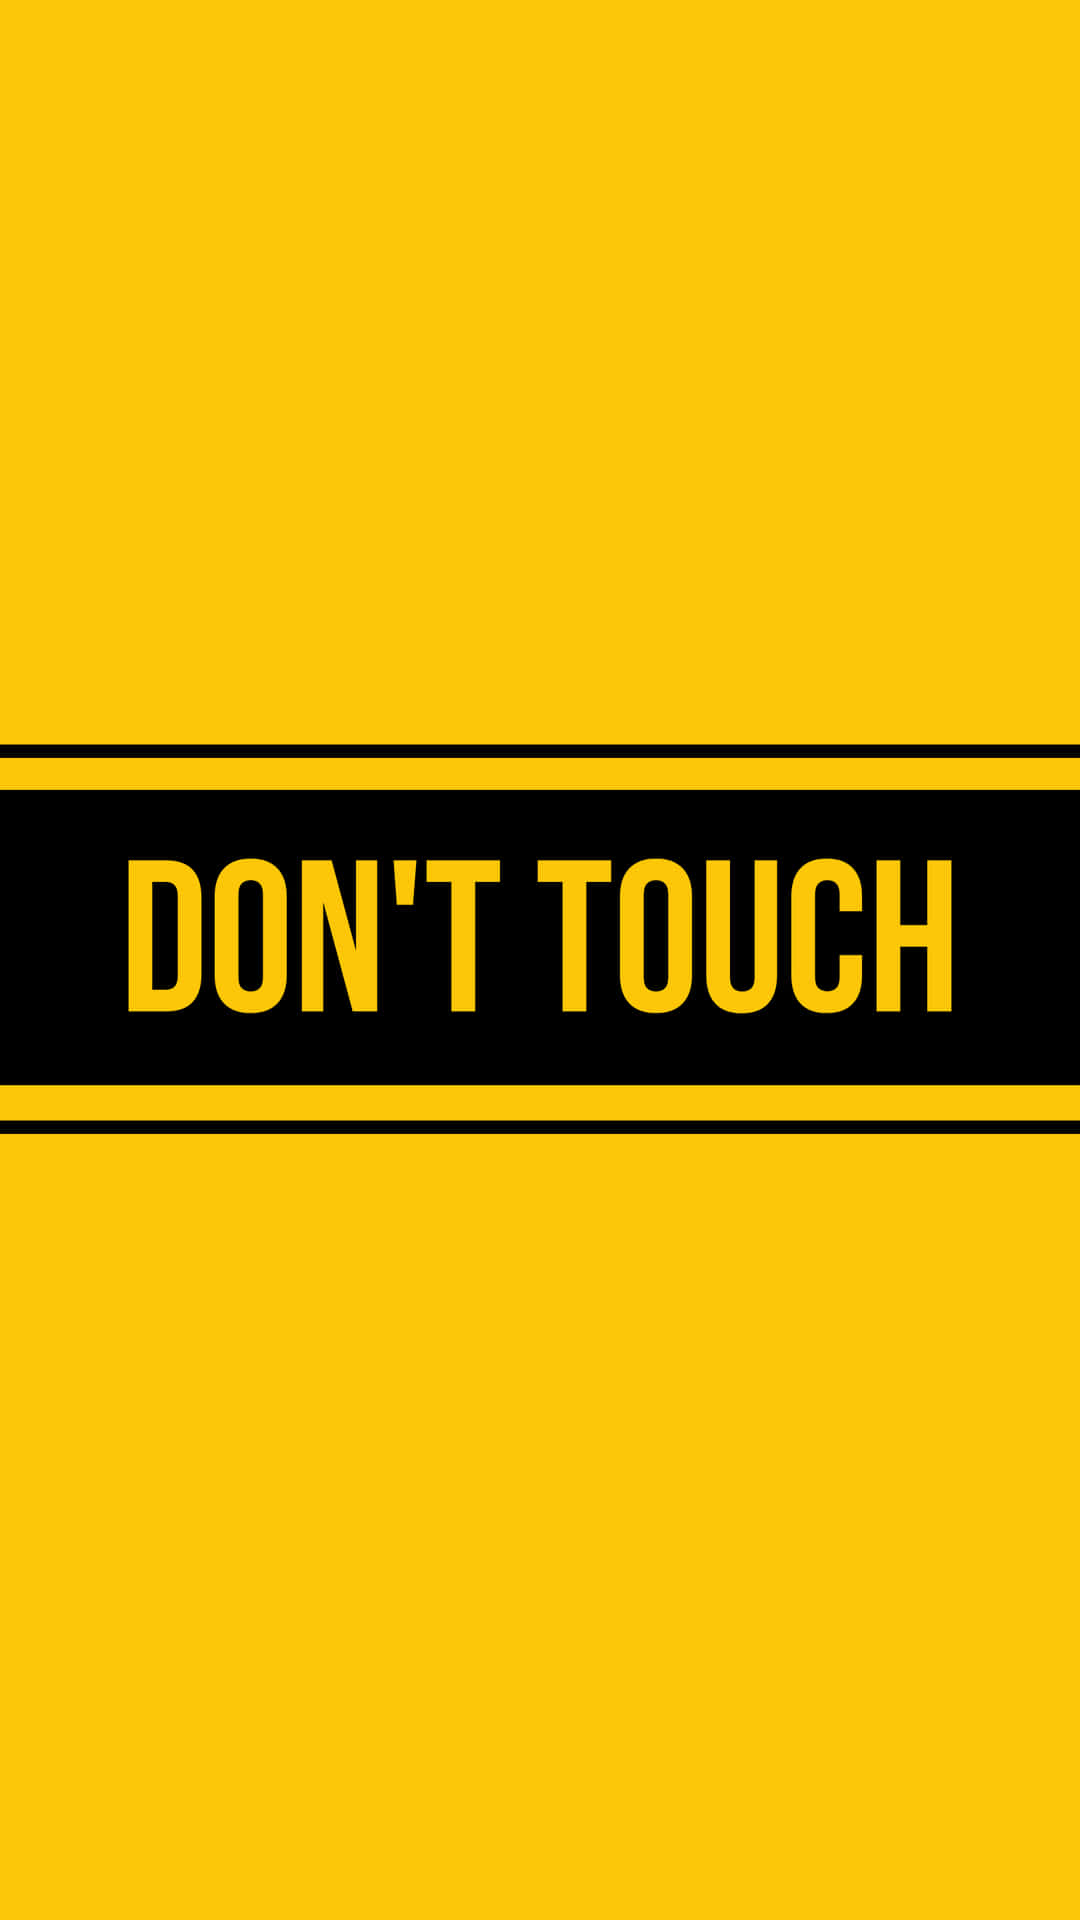 Don't Touch - A Yellow Background With A Black Stripe Wallpaper